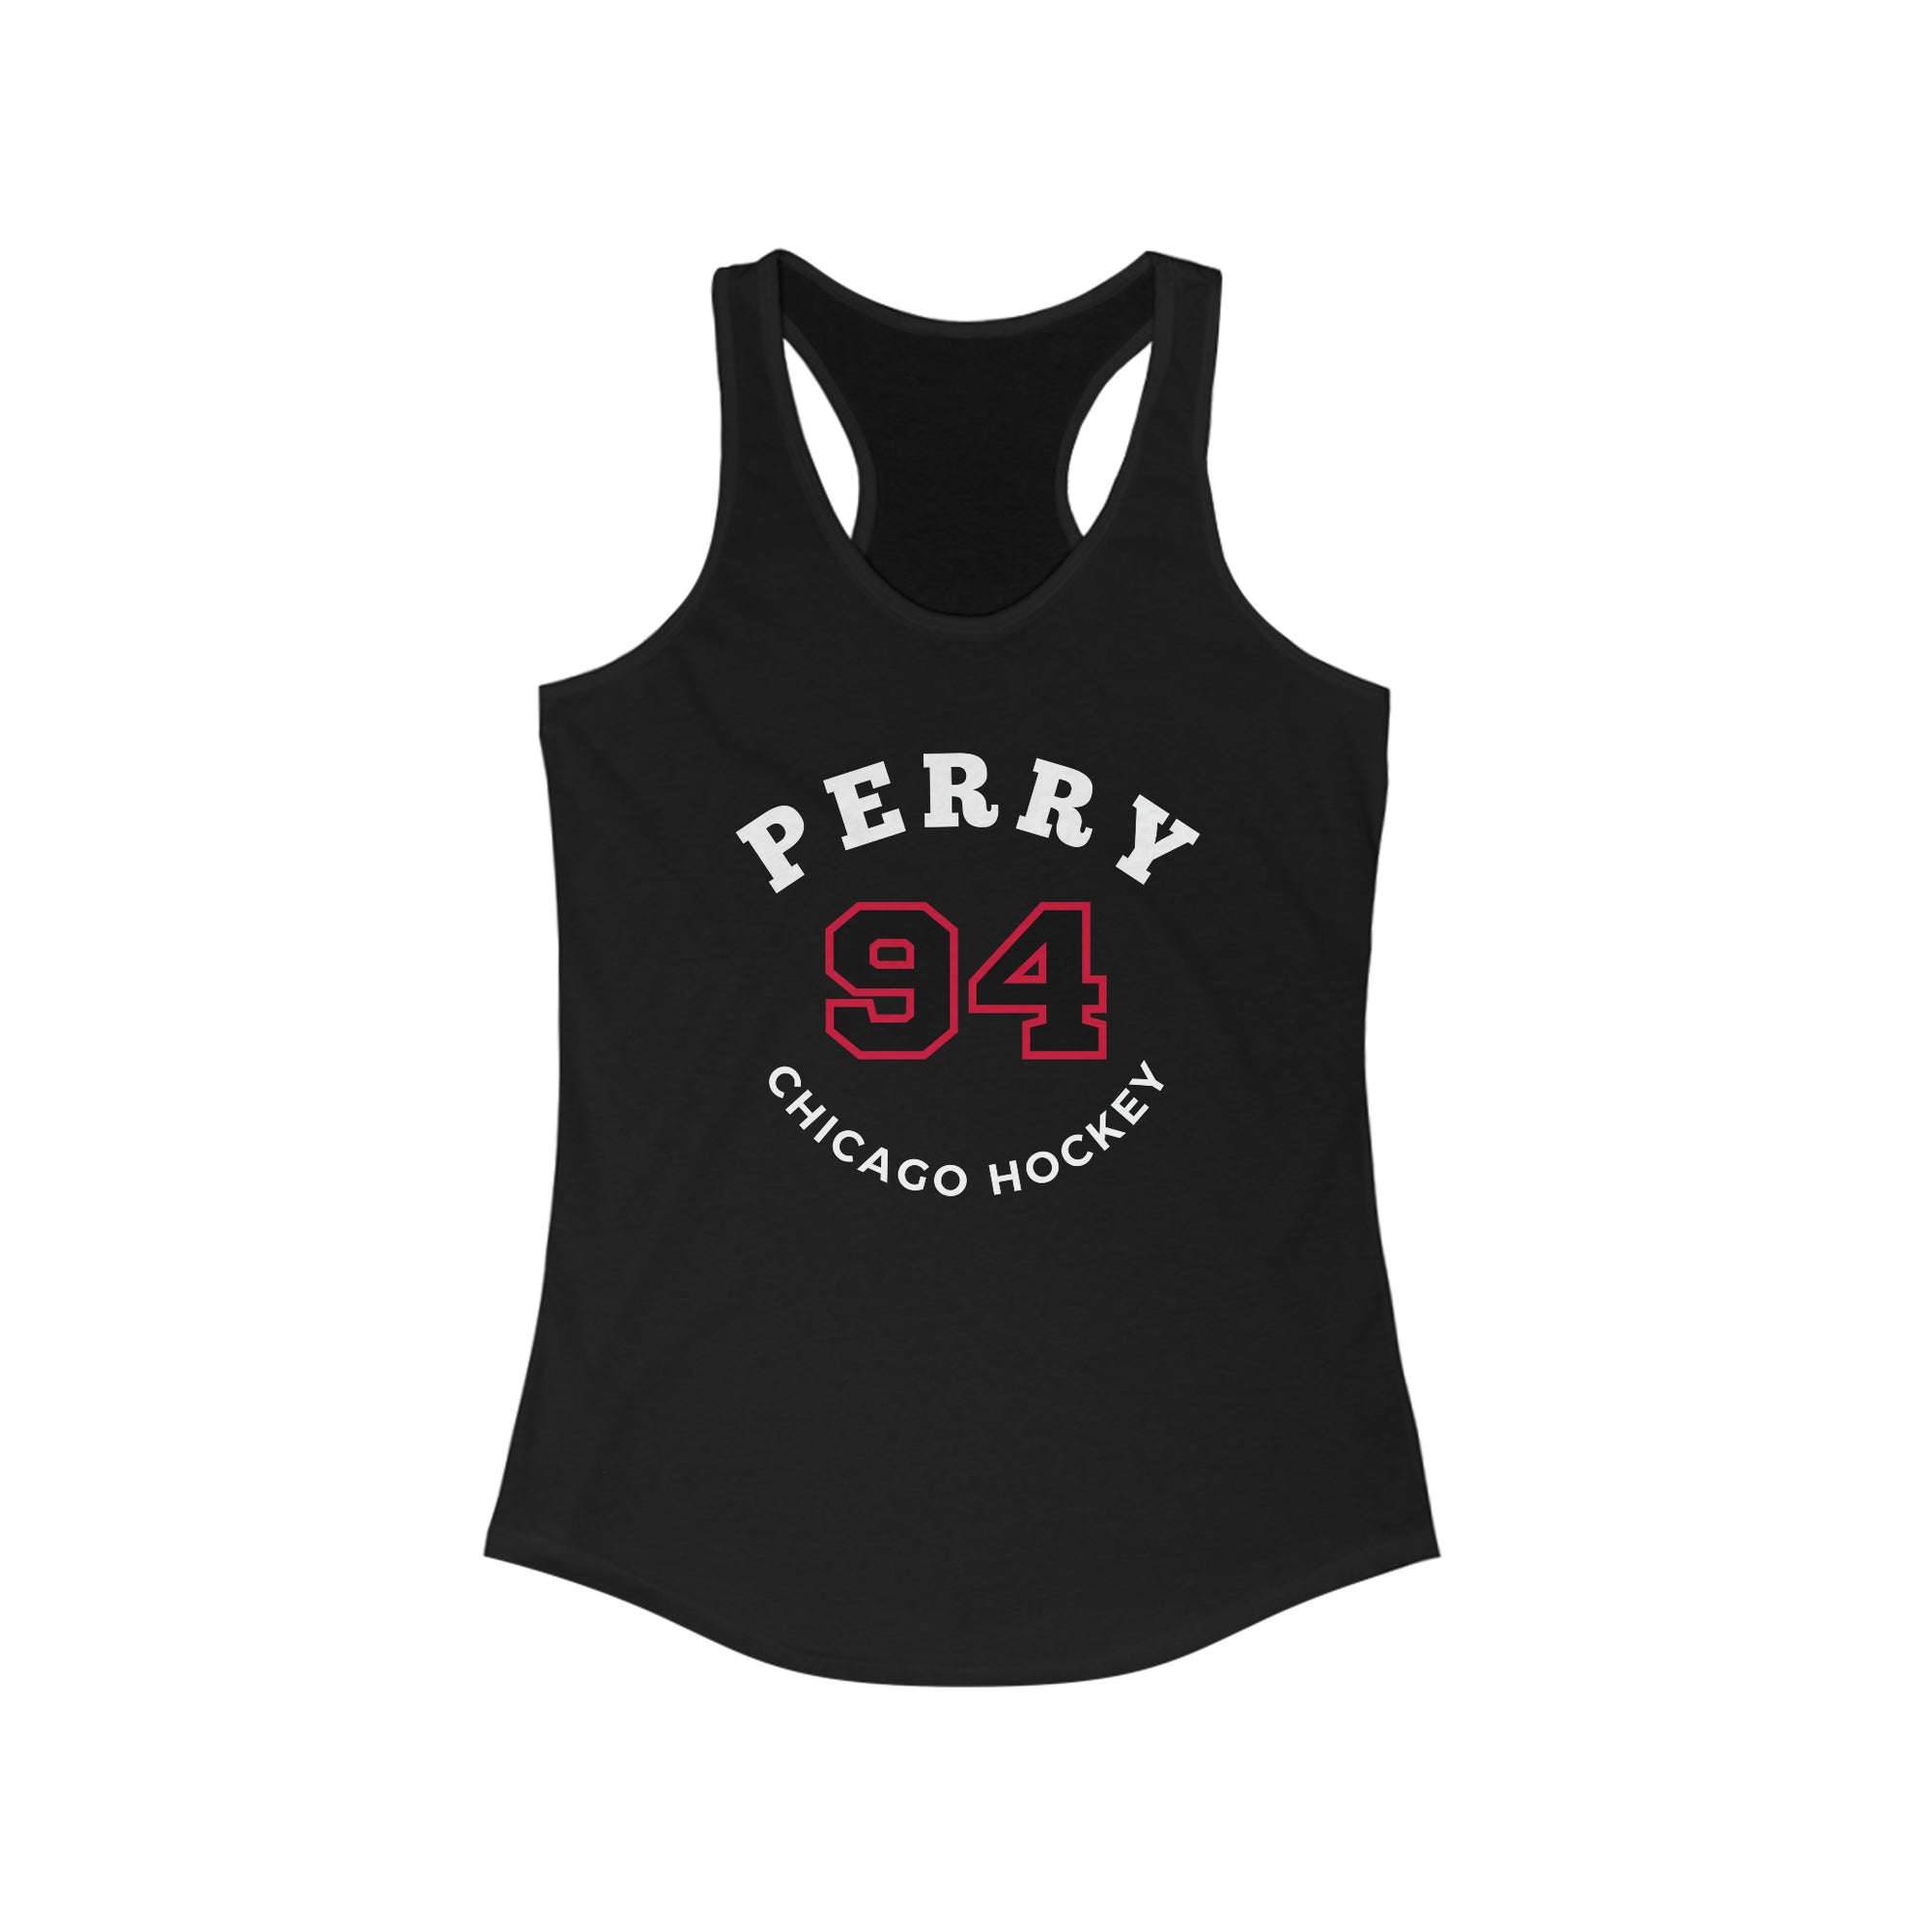 Perry 94 Chicago Hockey Number Arch Design Women's Ideal Racerback Tank Top